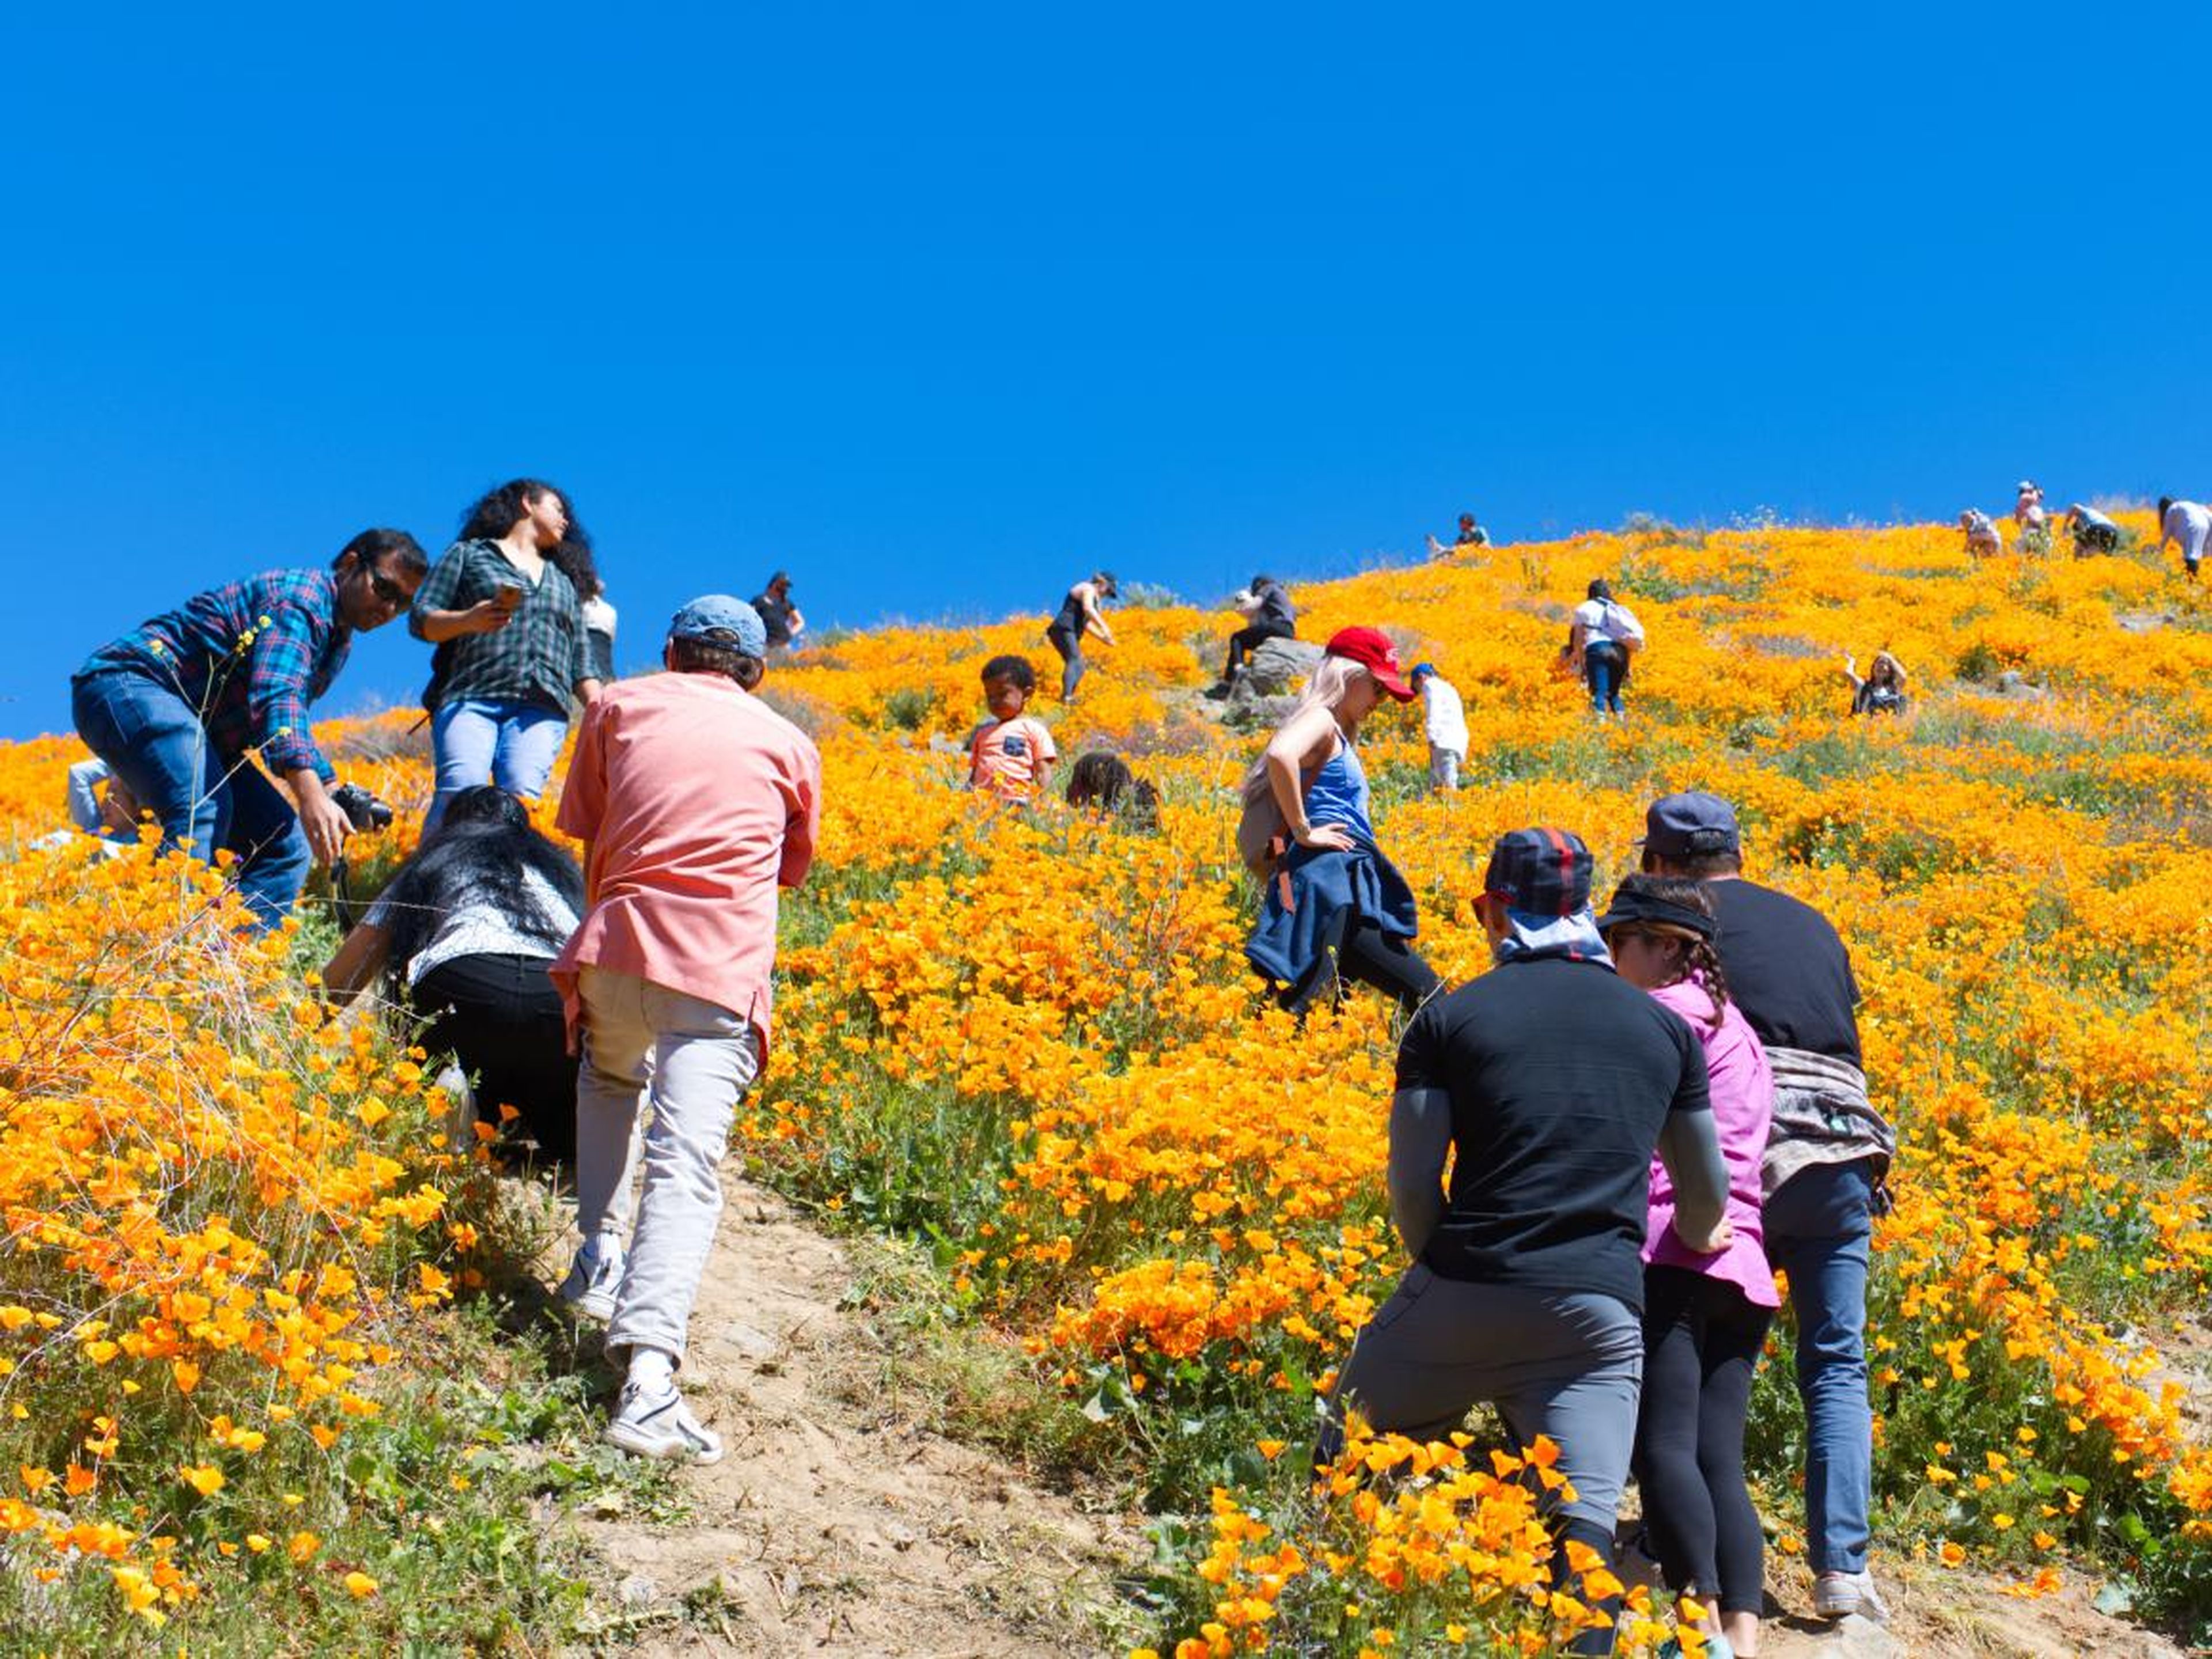 Tourists climb the hills in a nature reserve in Elsinore, California, where orange poppies bloom.